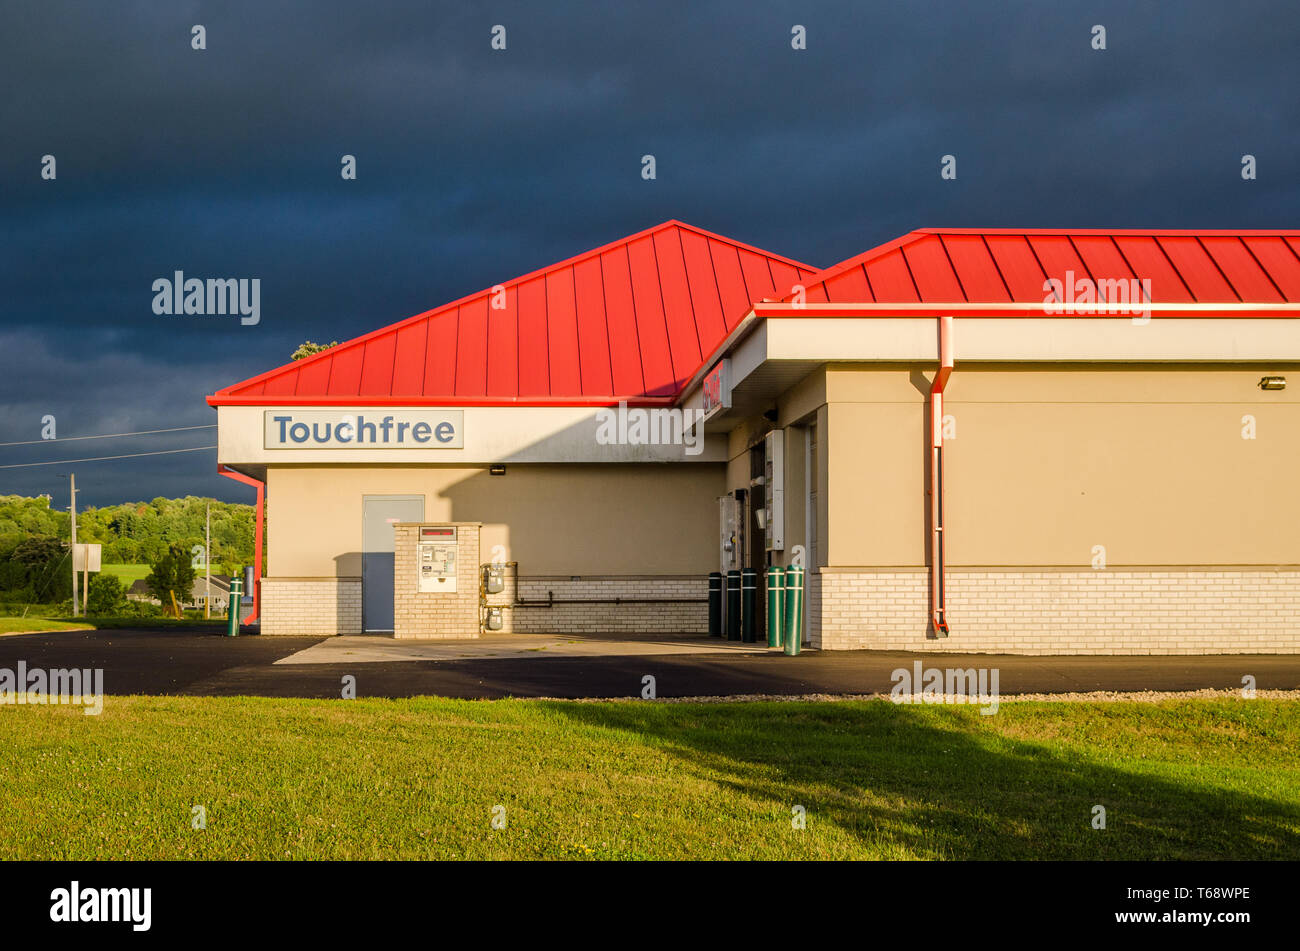 Touchfree car wash blue sky Red Roof Stockfoto